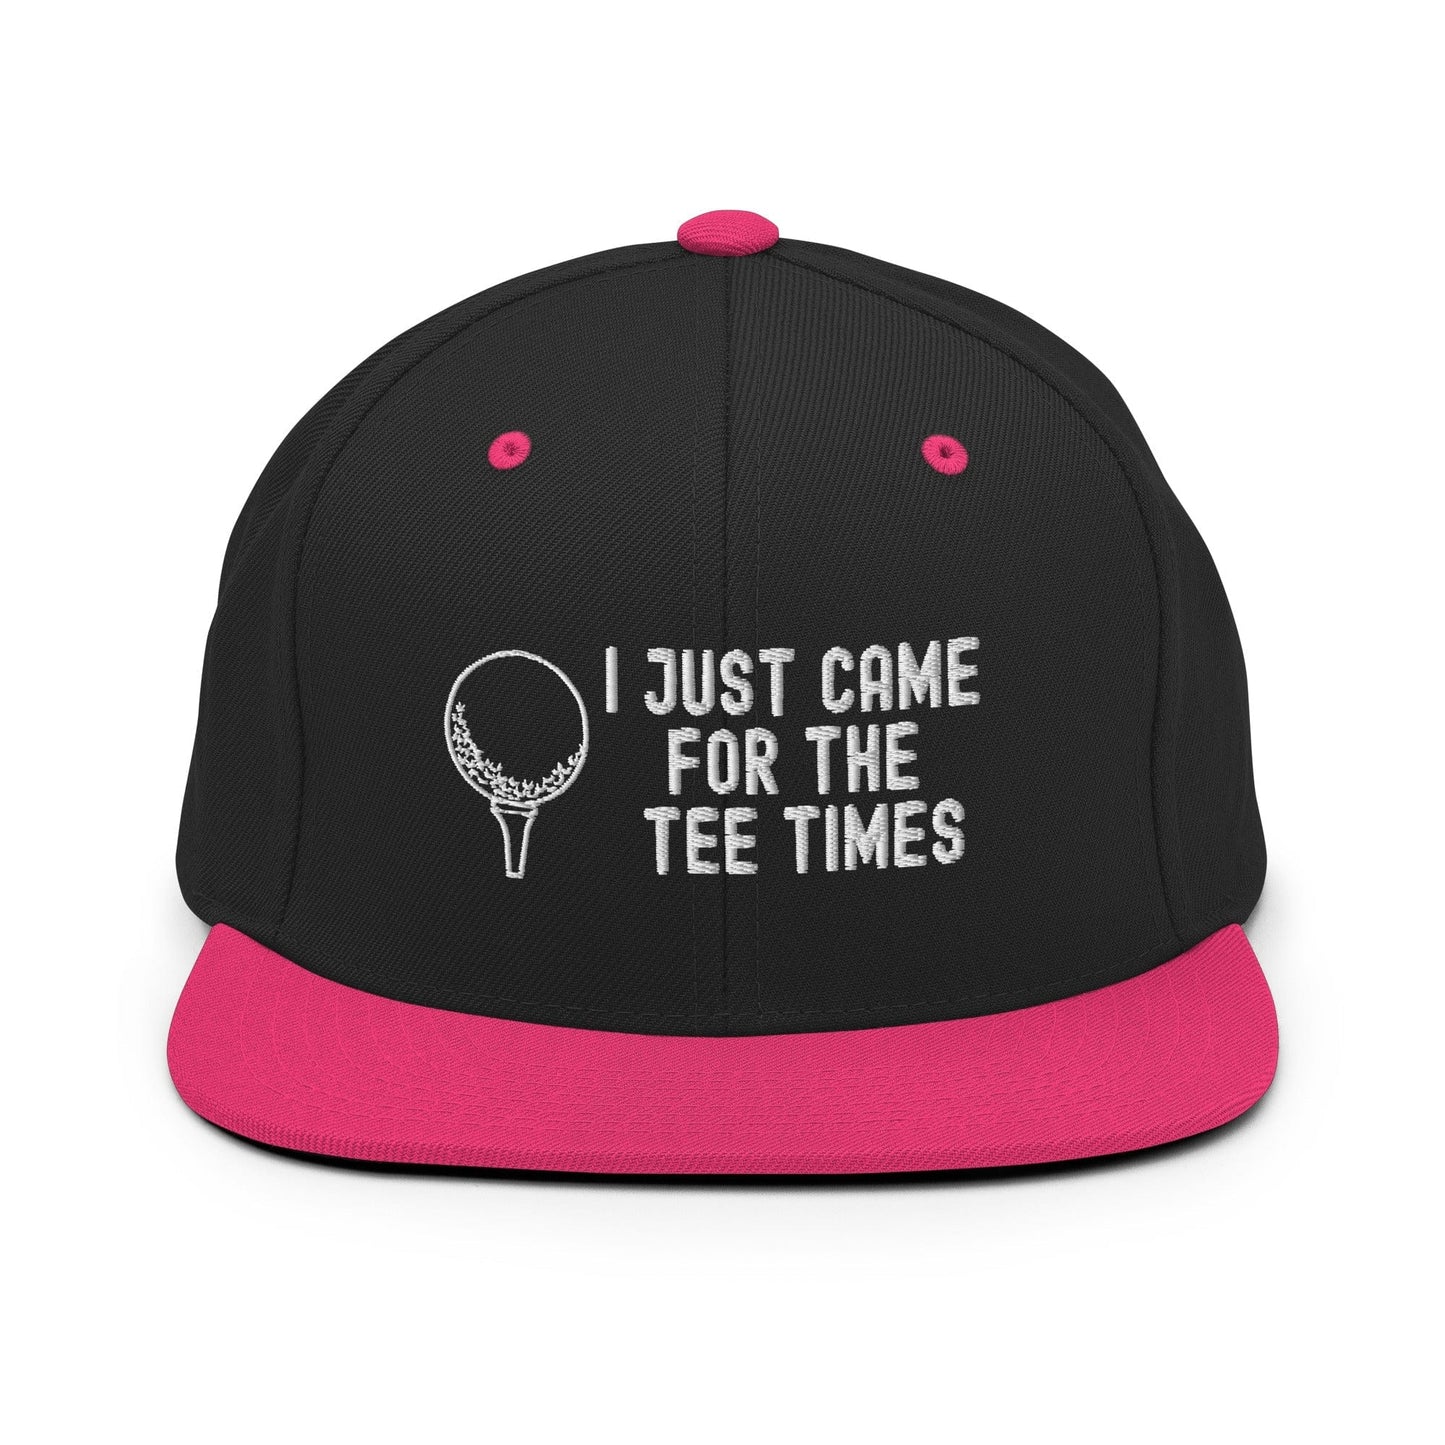 Funny Golfer Gifts  Snapback Hat Black/ Neon Pink I Just Came For The Tee Times Snapback Hat